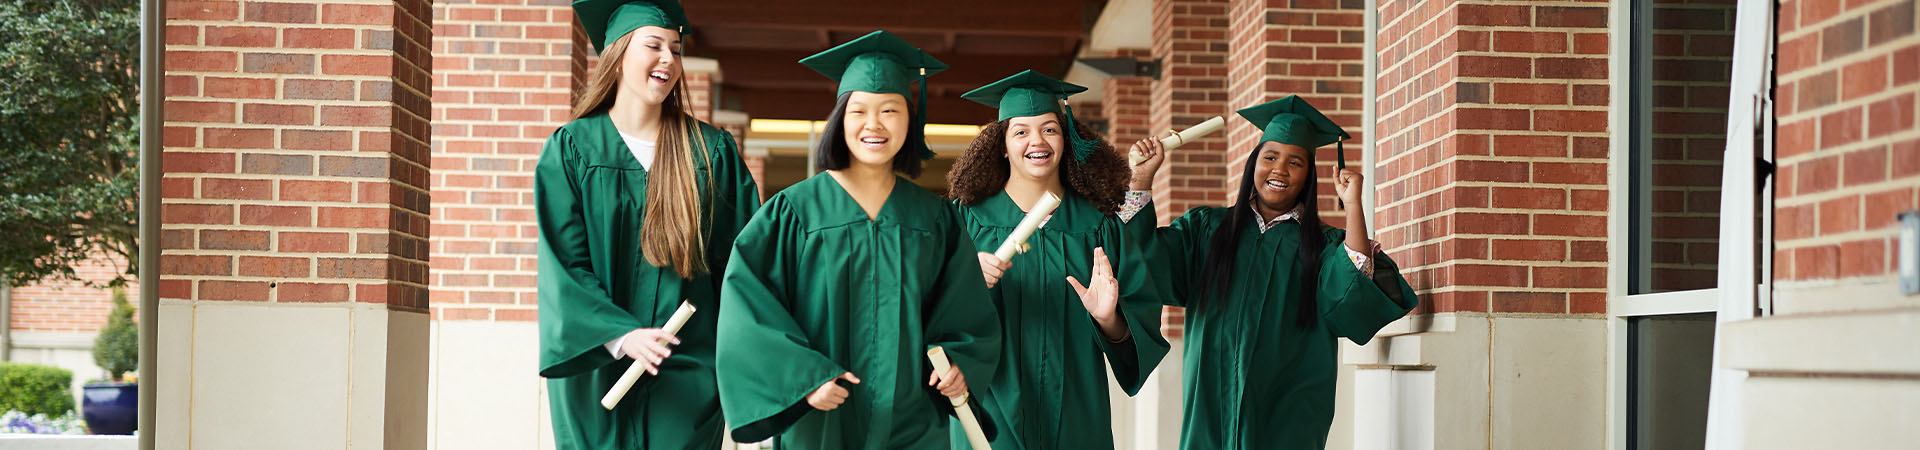  Girl Scouts in green graduation cap and gowns holding paper scrolls and smiling outside campus 